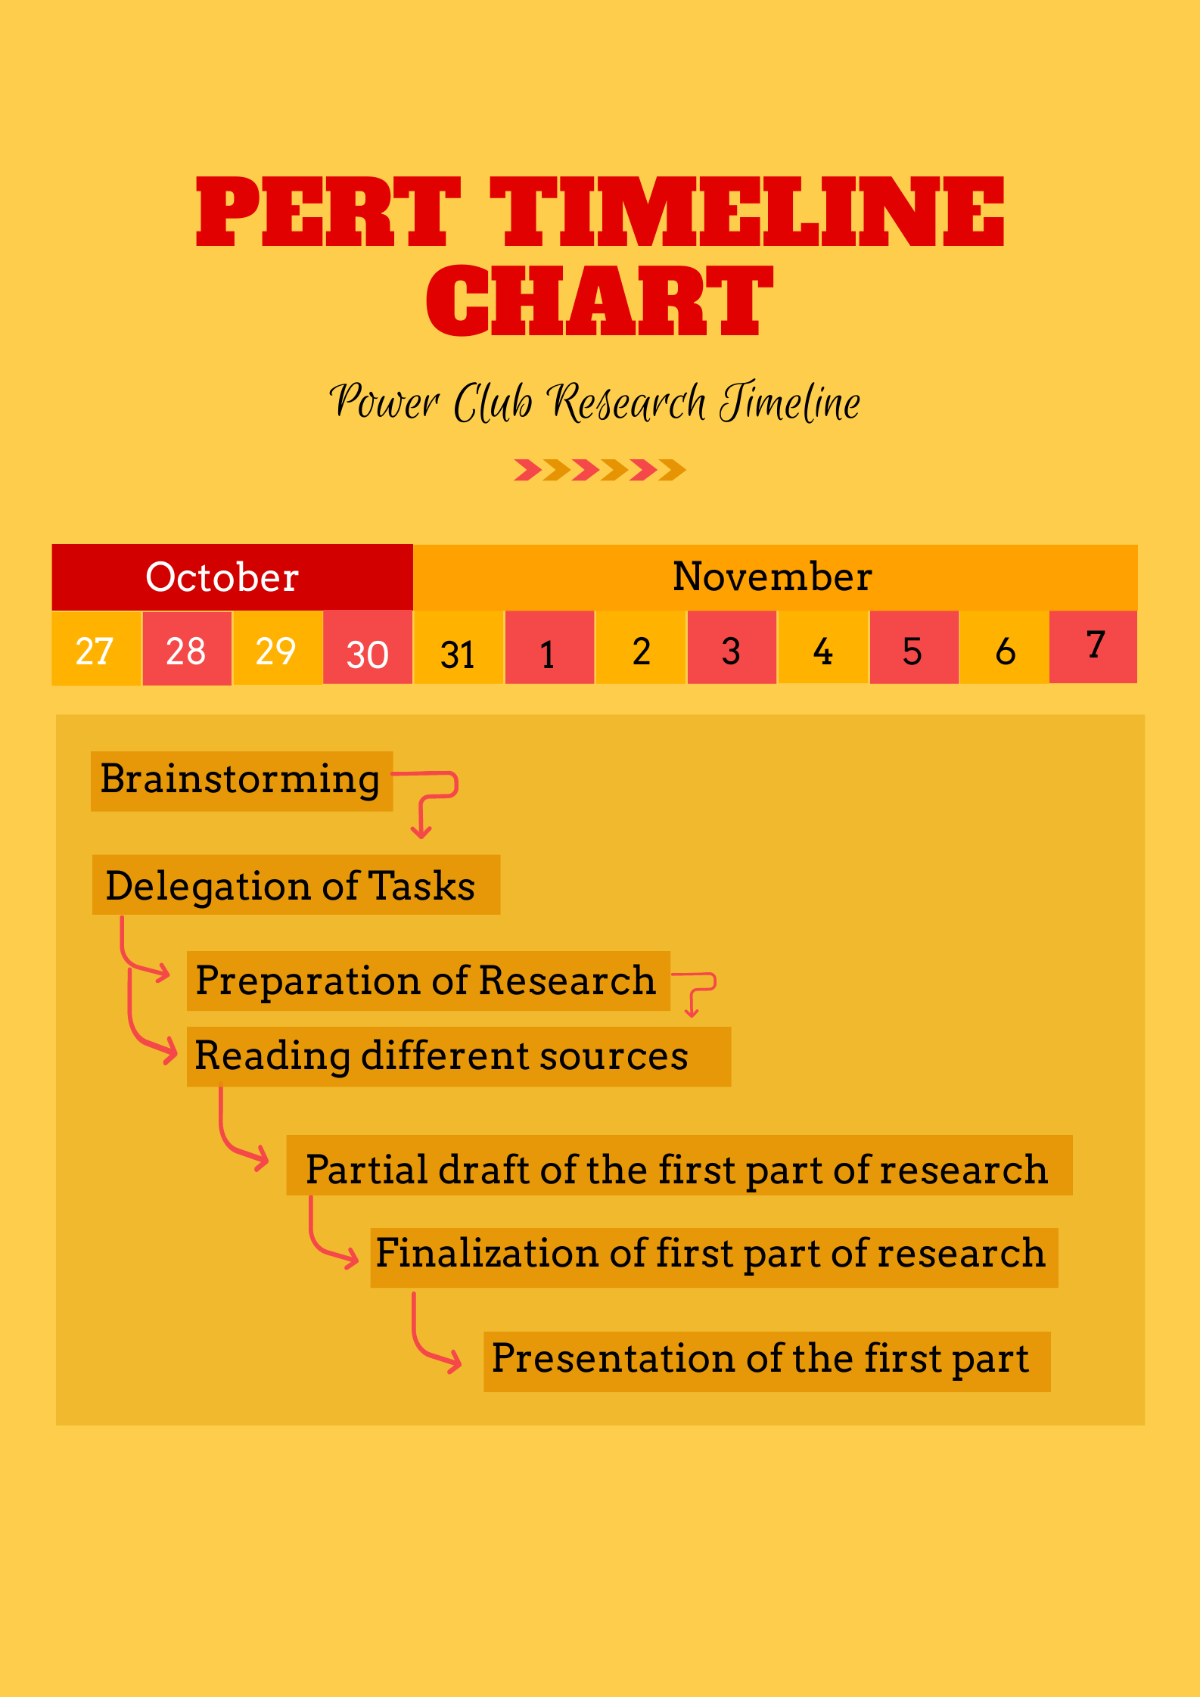 Free PERT Timeline Chart Template